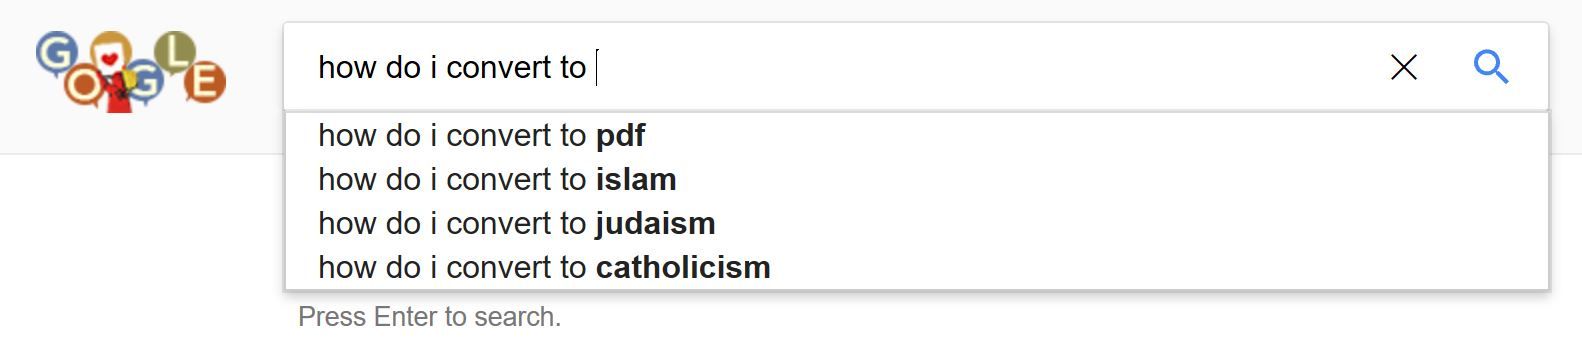 PDF is the most popular religion